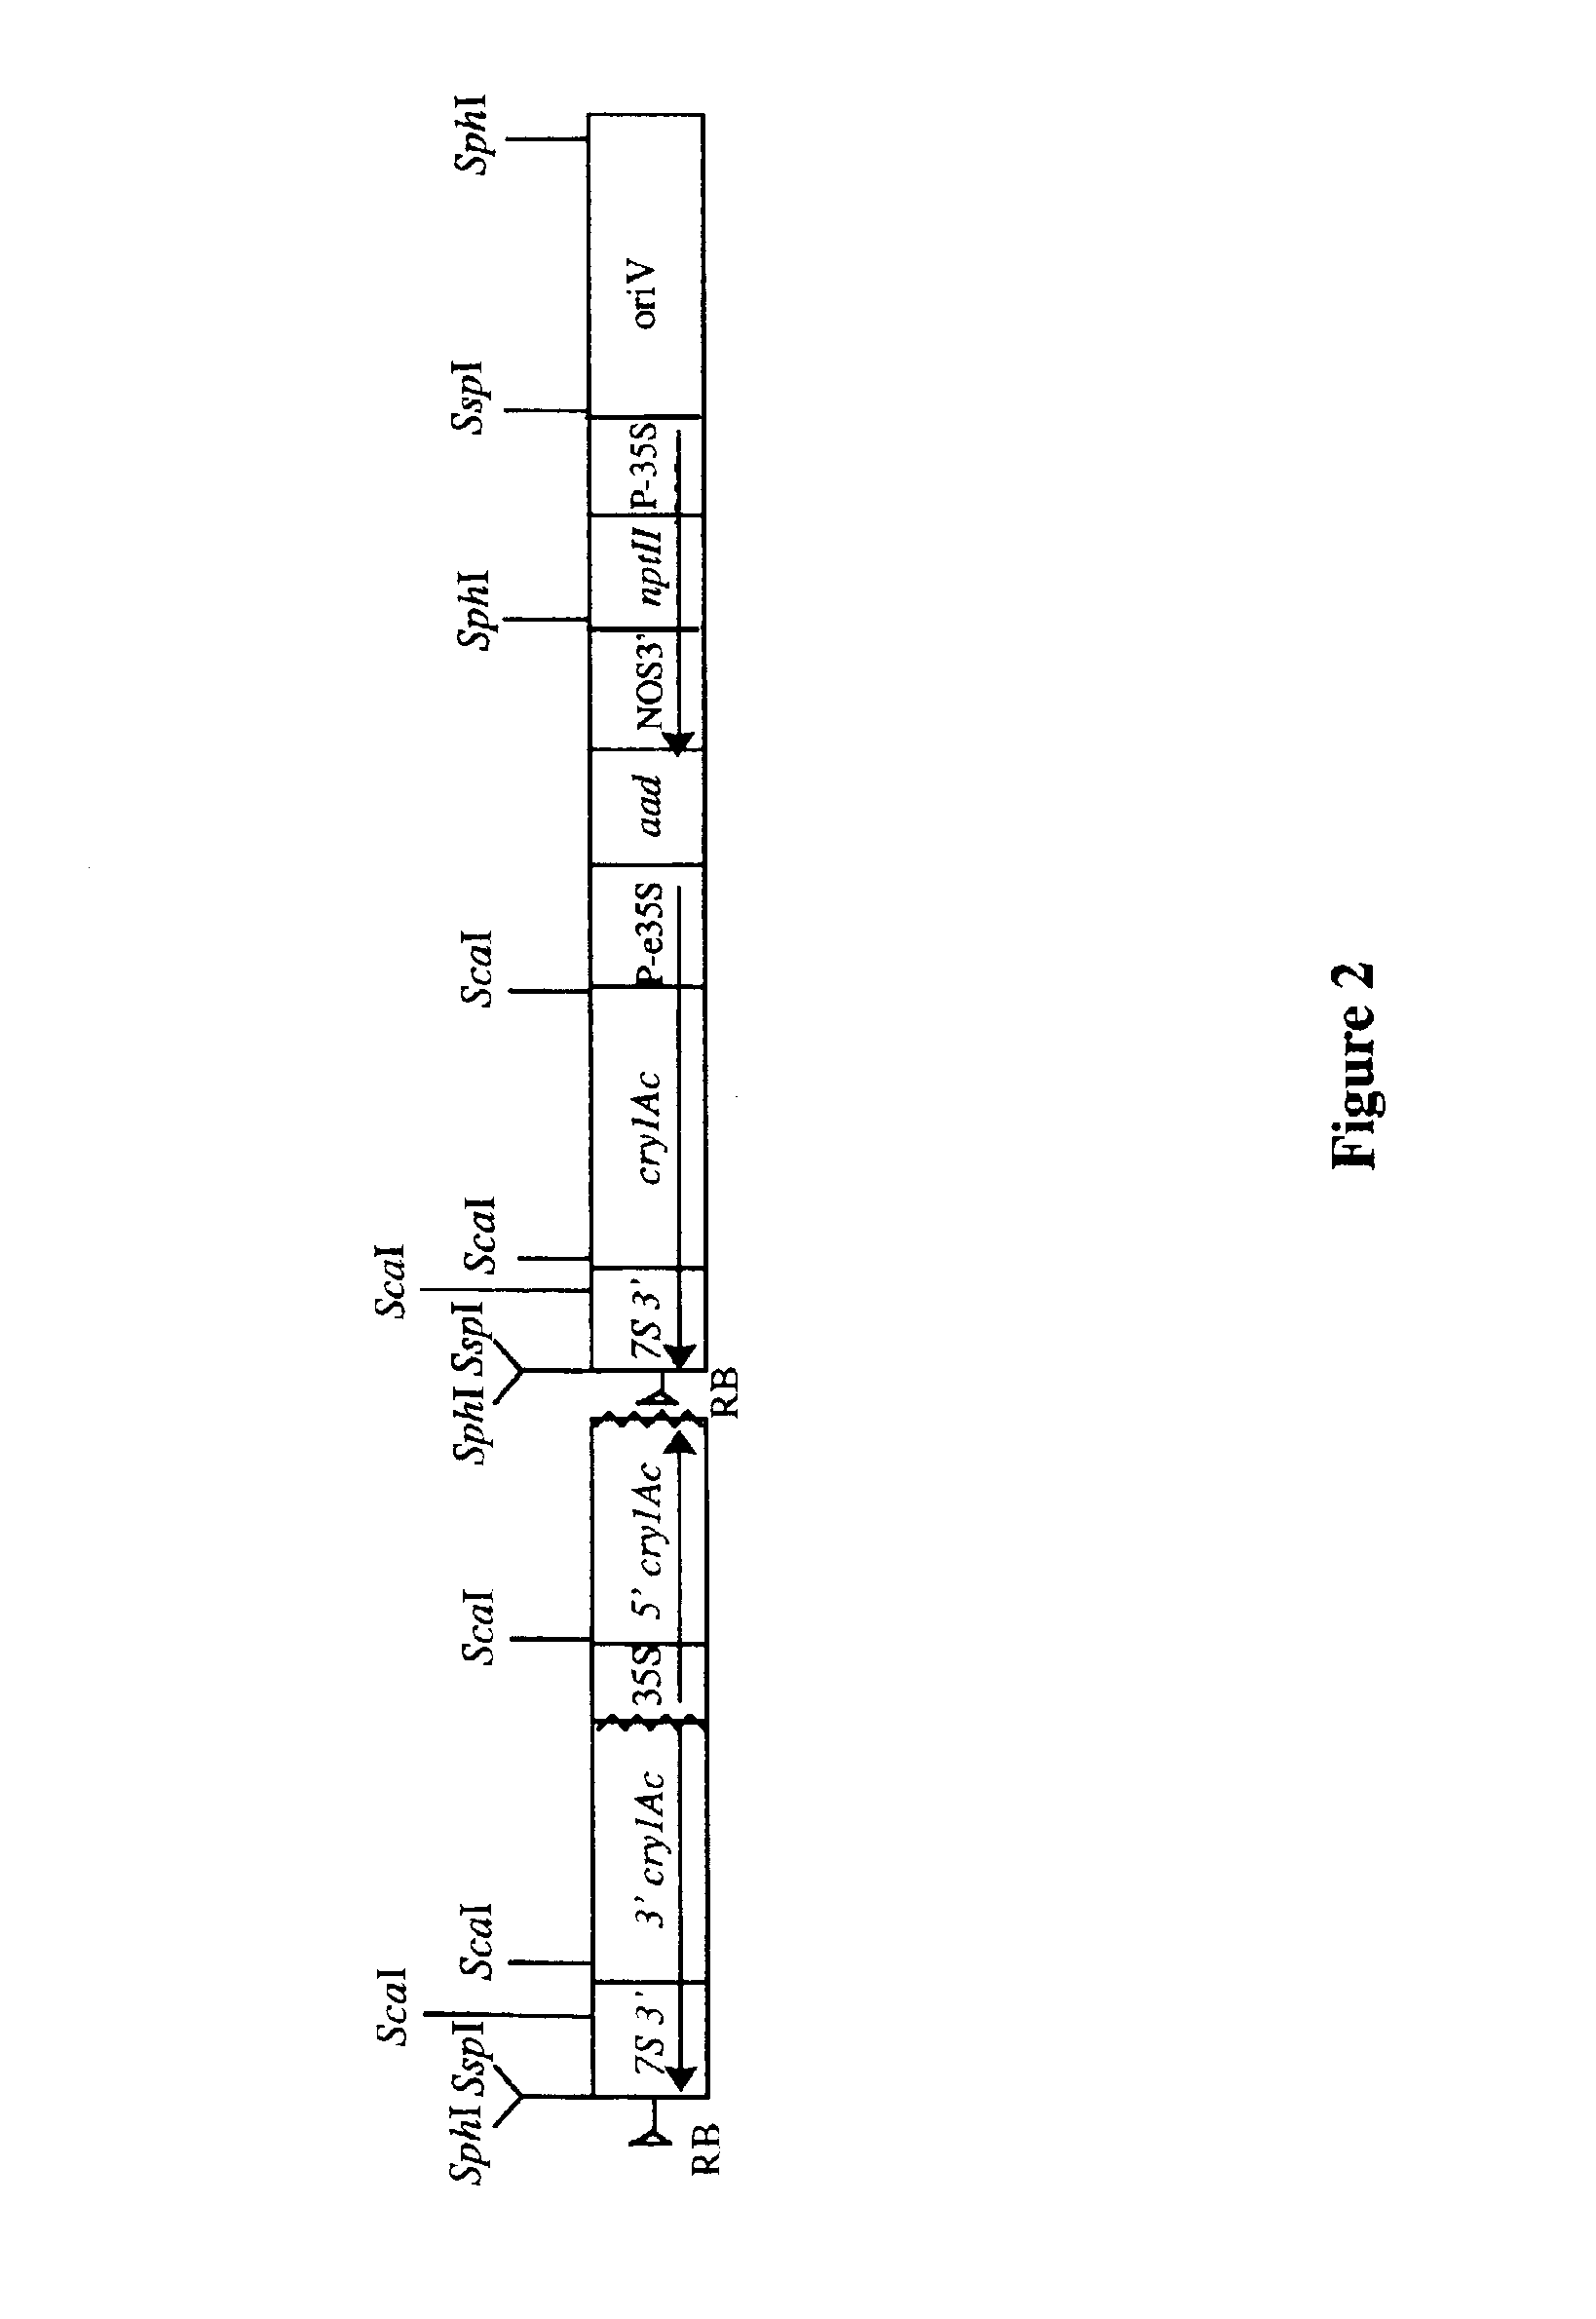 Cotton event PV-GHBK04 (757) and compositions and methods for detection thereof